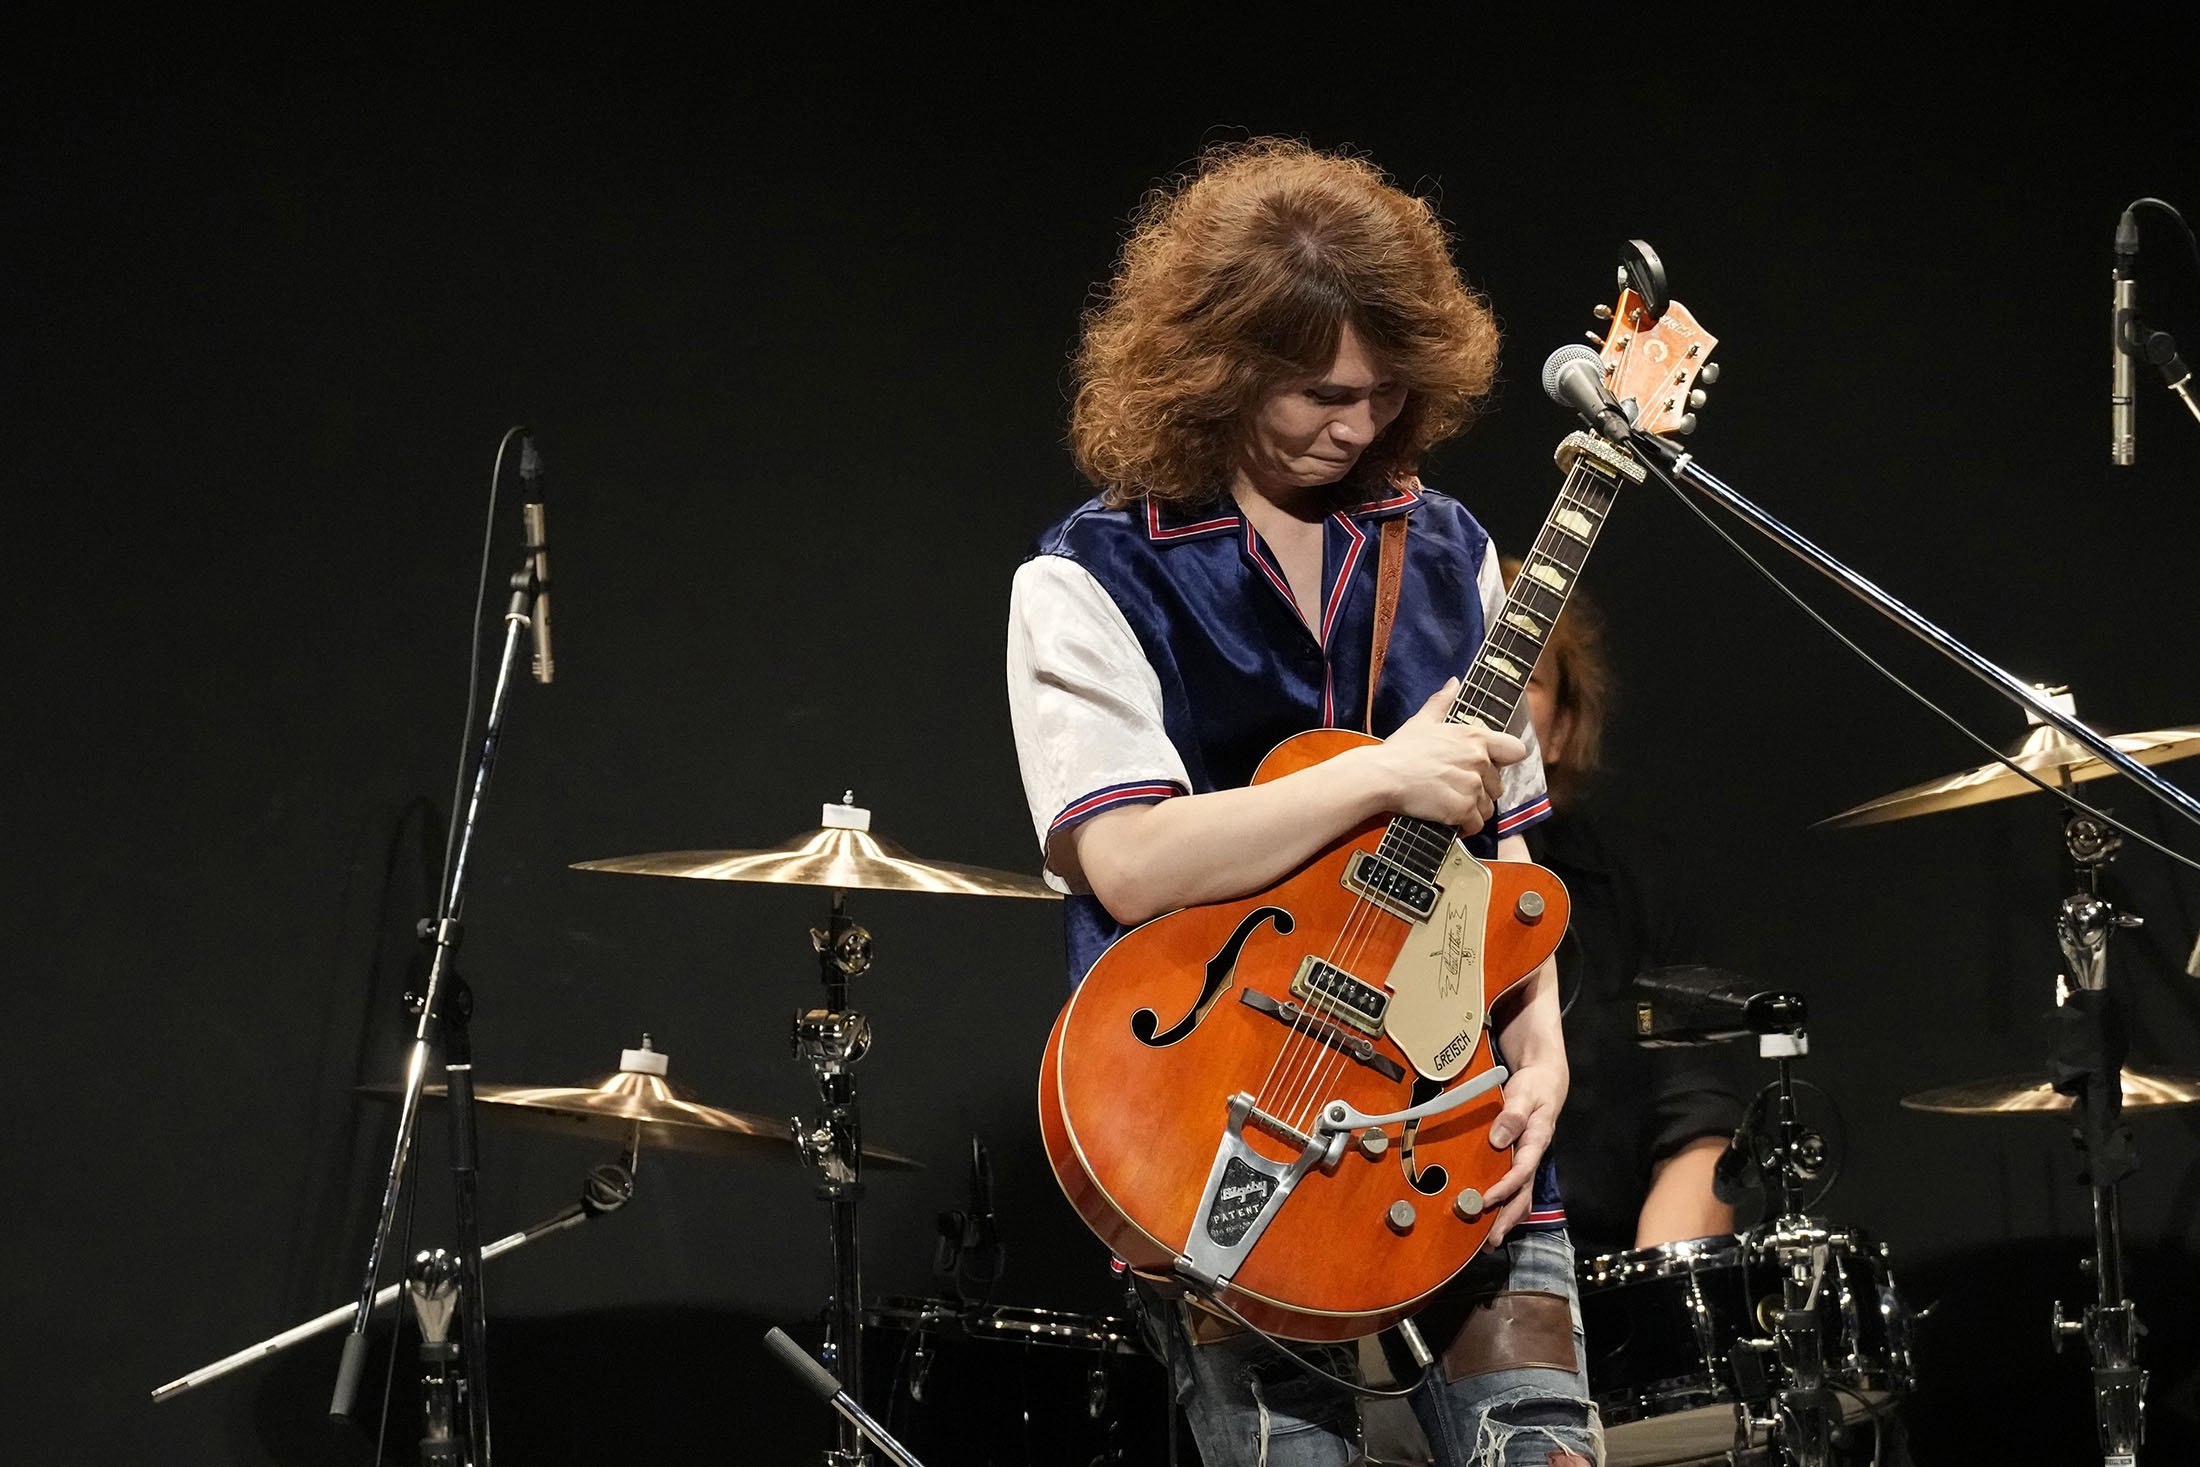 Japanese musician TAKESHI holds his guitar which was found out as a stolen Gretsch guitar of Canadian rock legend Randy Bachman before returning it to Bachman during the Lost and Found Guitar Exchange Ceremony, at Canadian Embassy in Tokyo, Japan, July 1, 2022. (AP Photo)